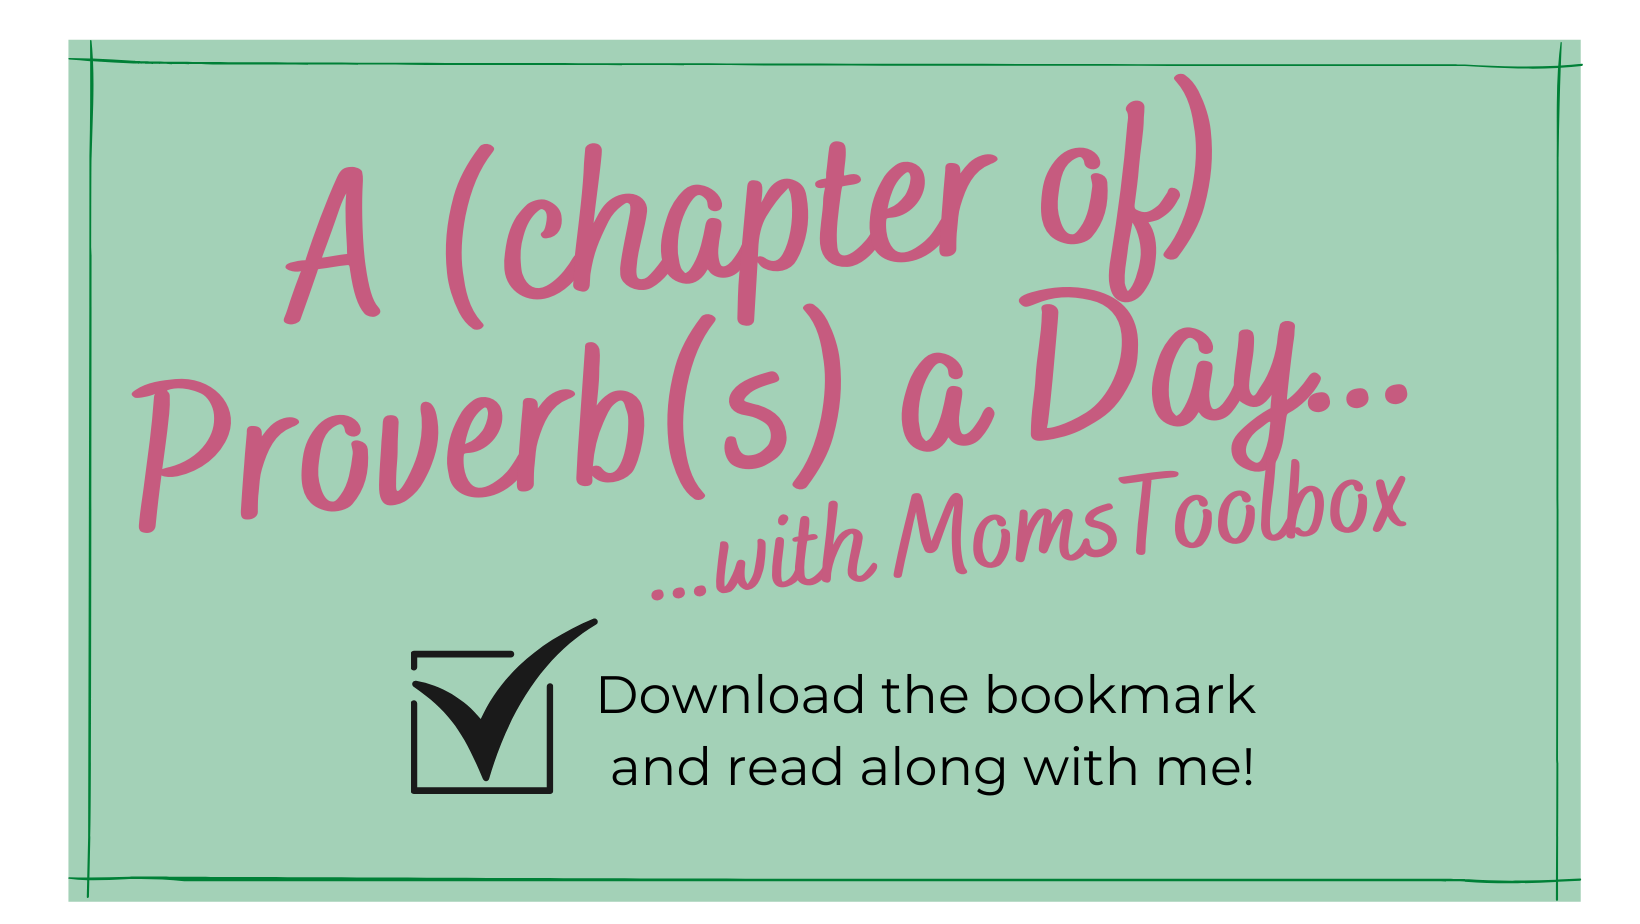 A (chapter of) Proverb(s) a Day for March... Mom's Toolbox